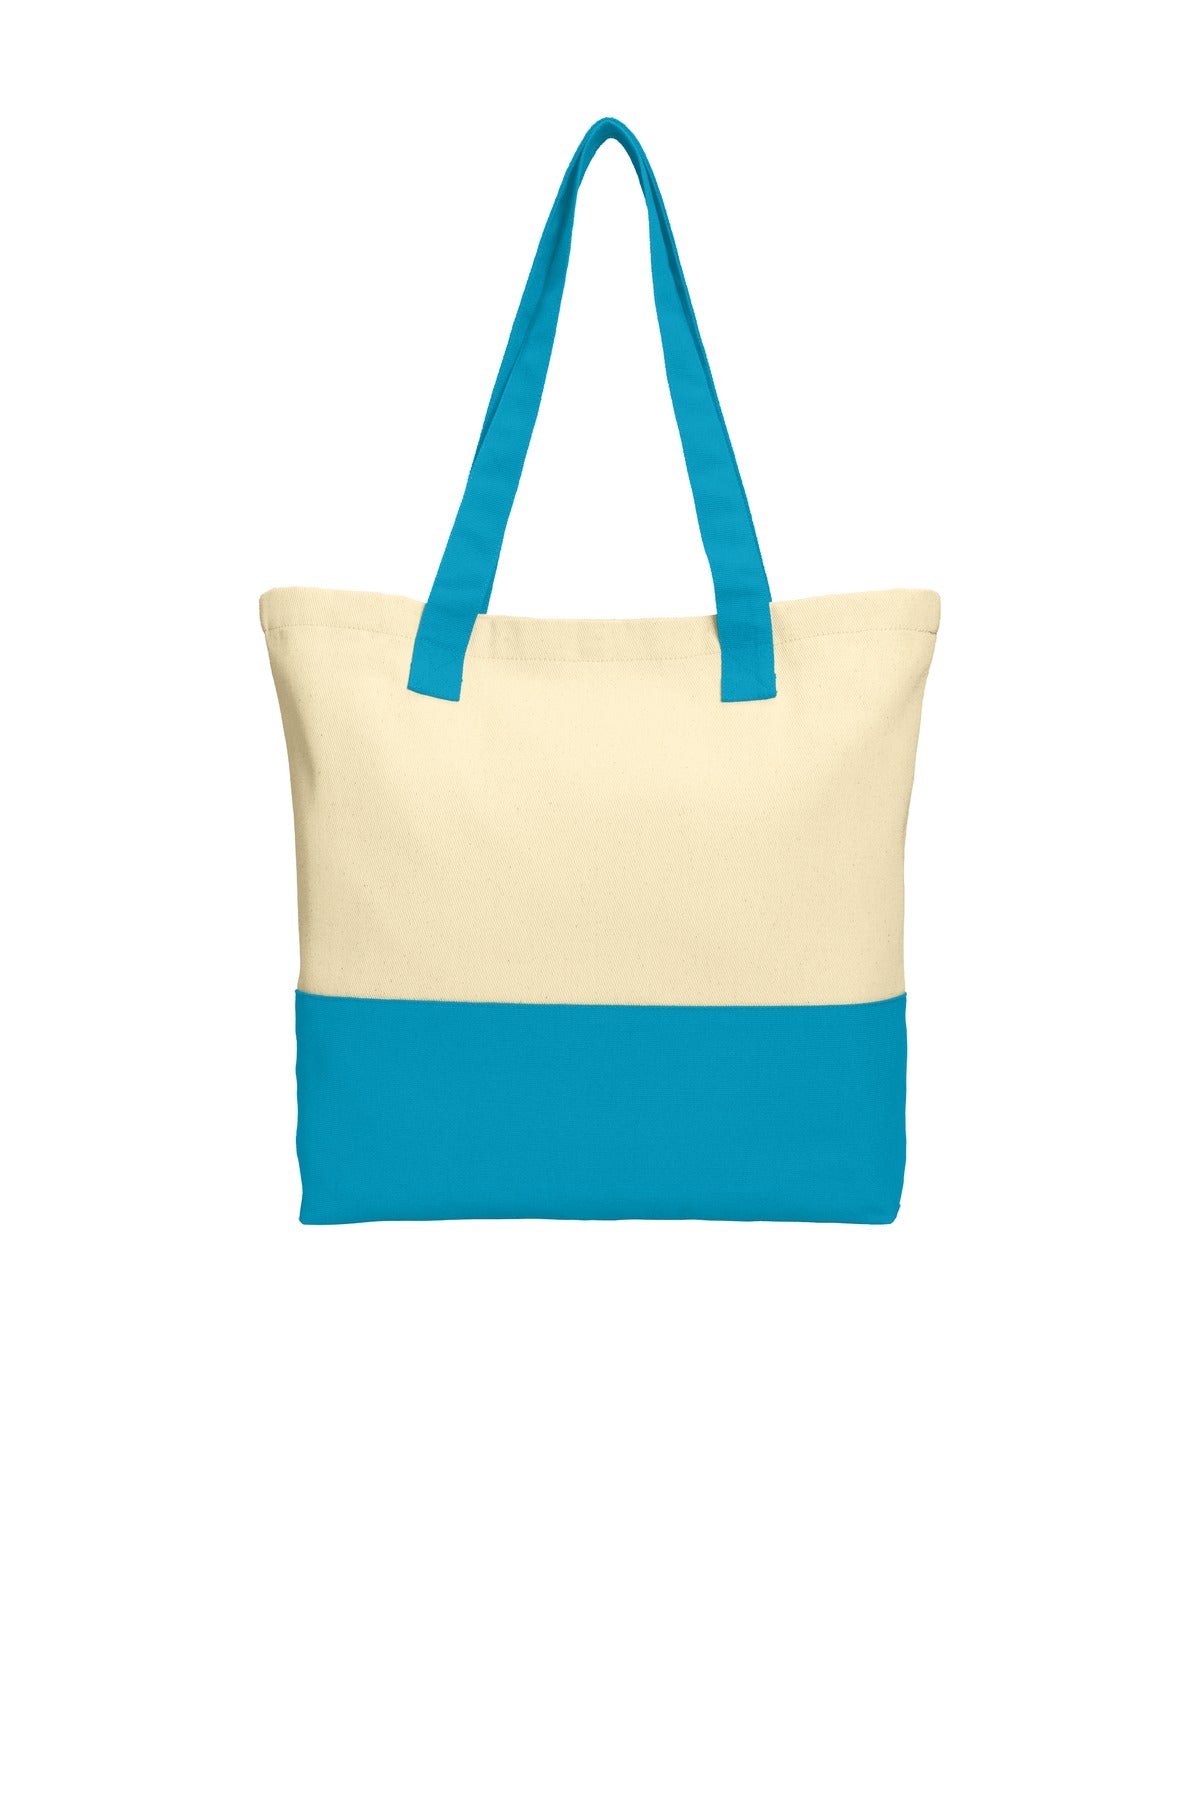 Photo of Port Authority Bags BG414  color  Natural/ Turquoise